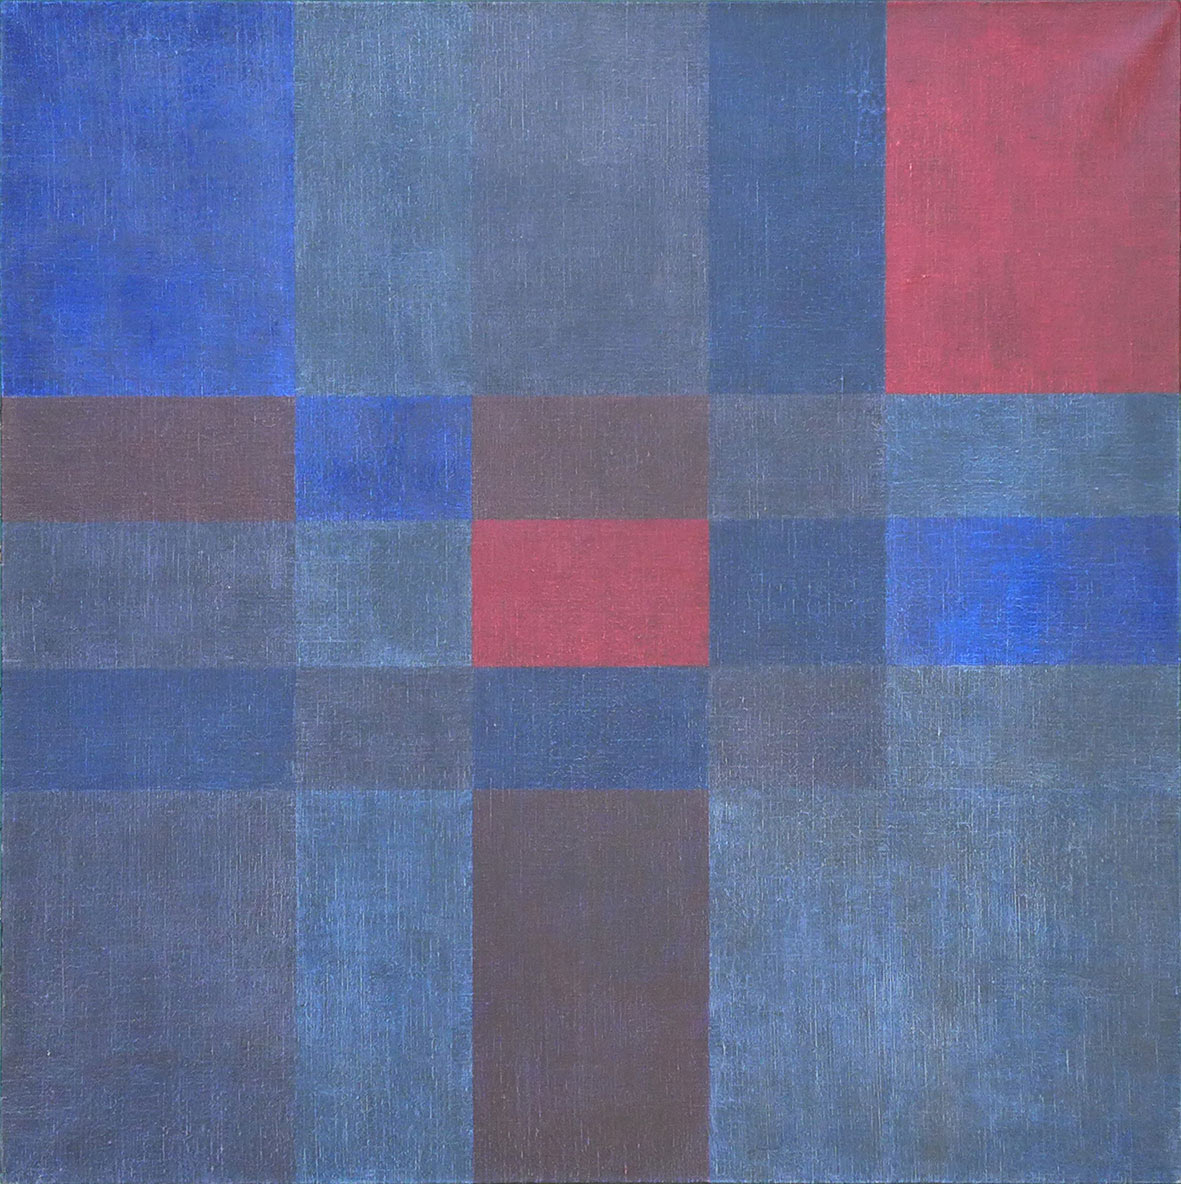 Two red rectangles illuminate a winter night atmosphere of ultramarine blue, night blue and a "black" blue.